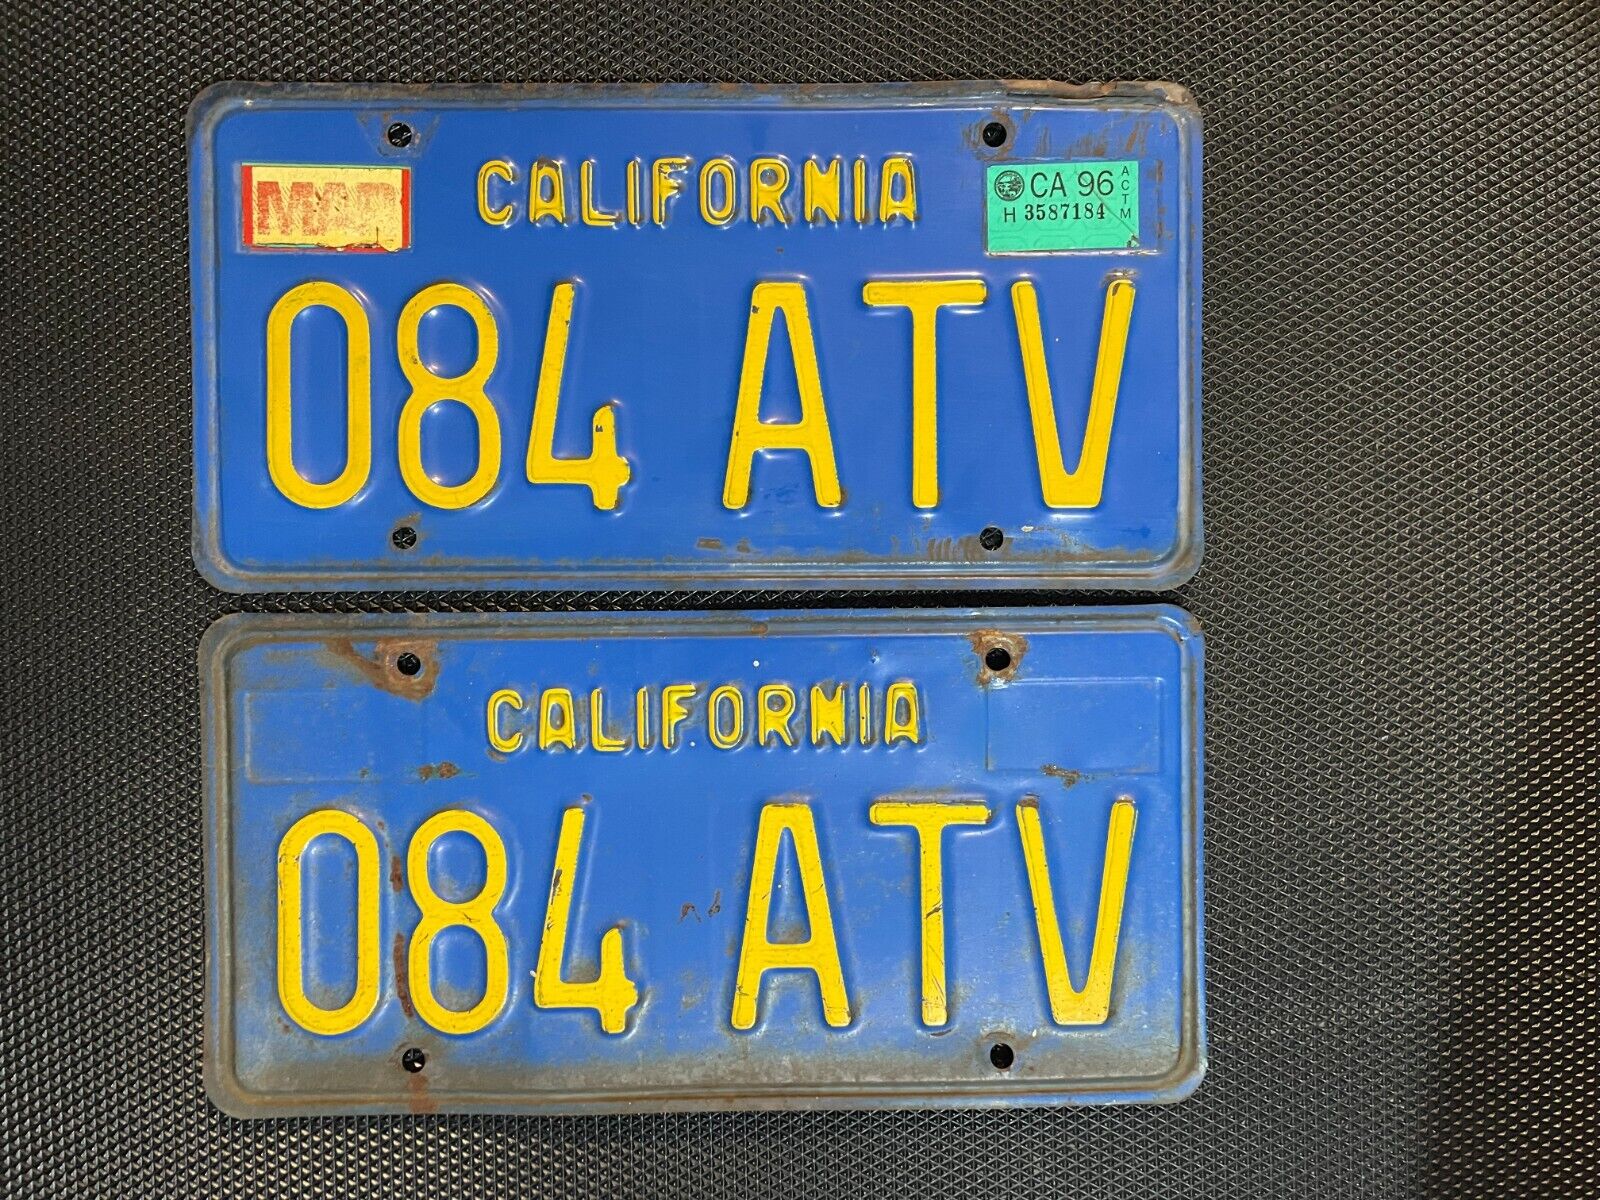 CALIFORNIA PAIR OF LICENSE PLATES BLUE 084 ATV MARCH 1996 PLATE